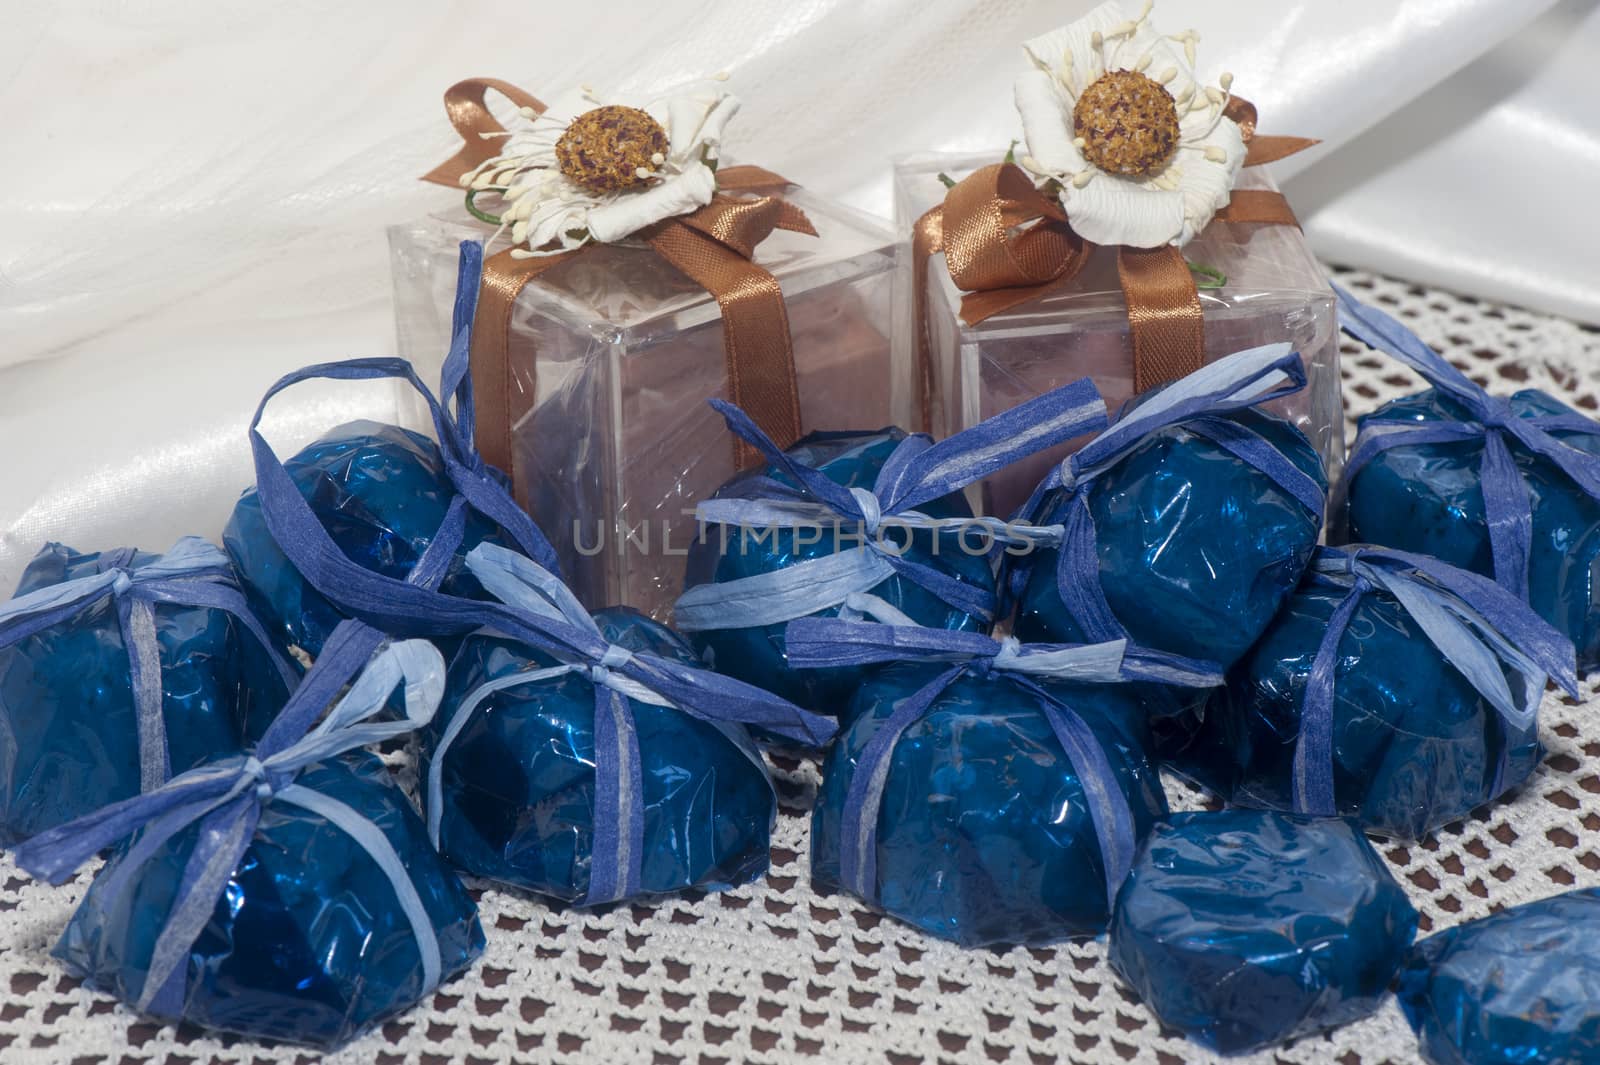 home made weddings favors by carla720